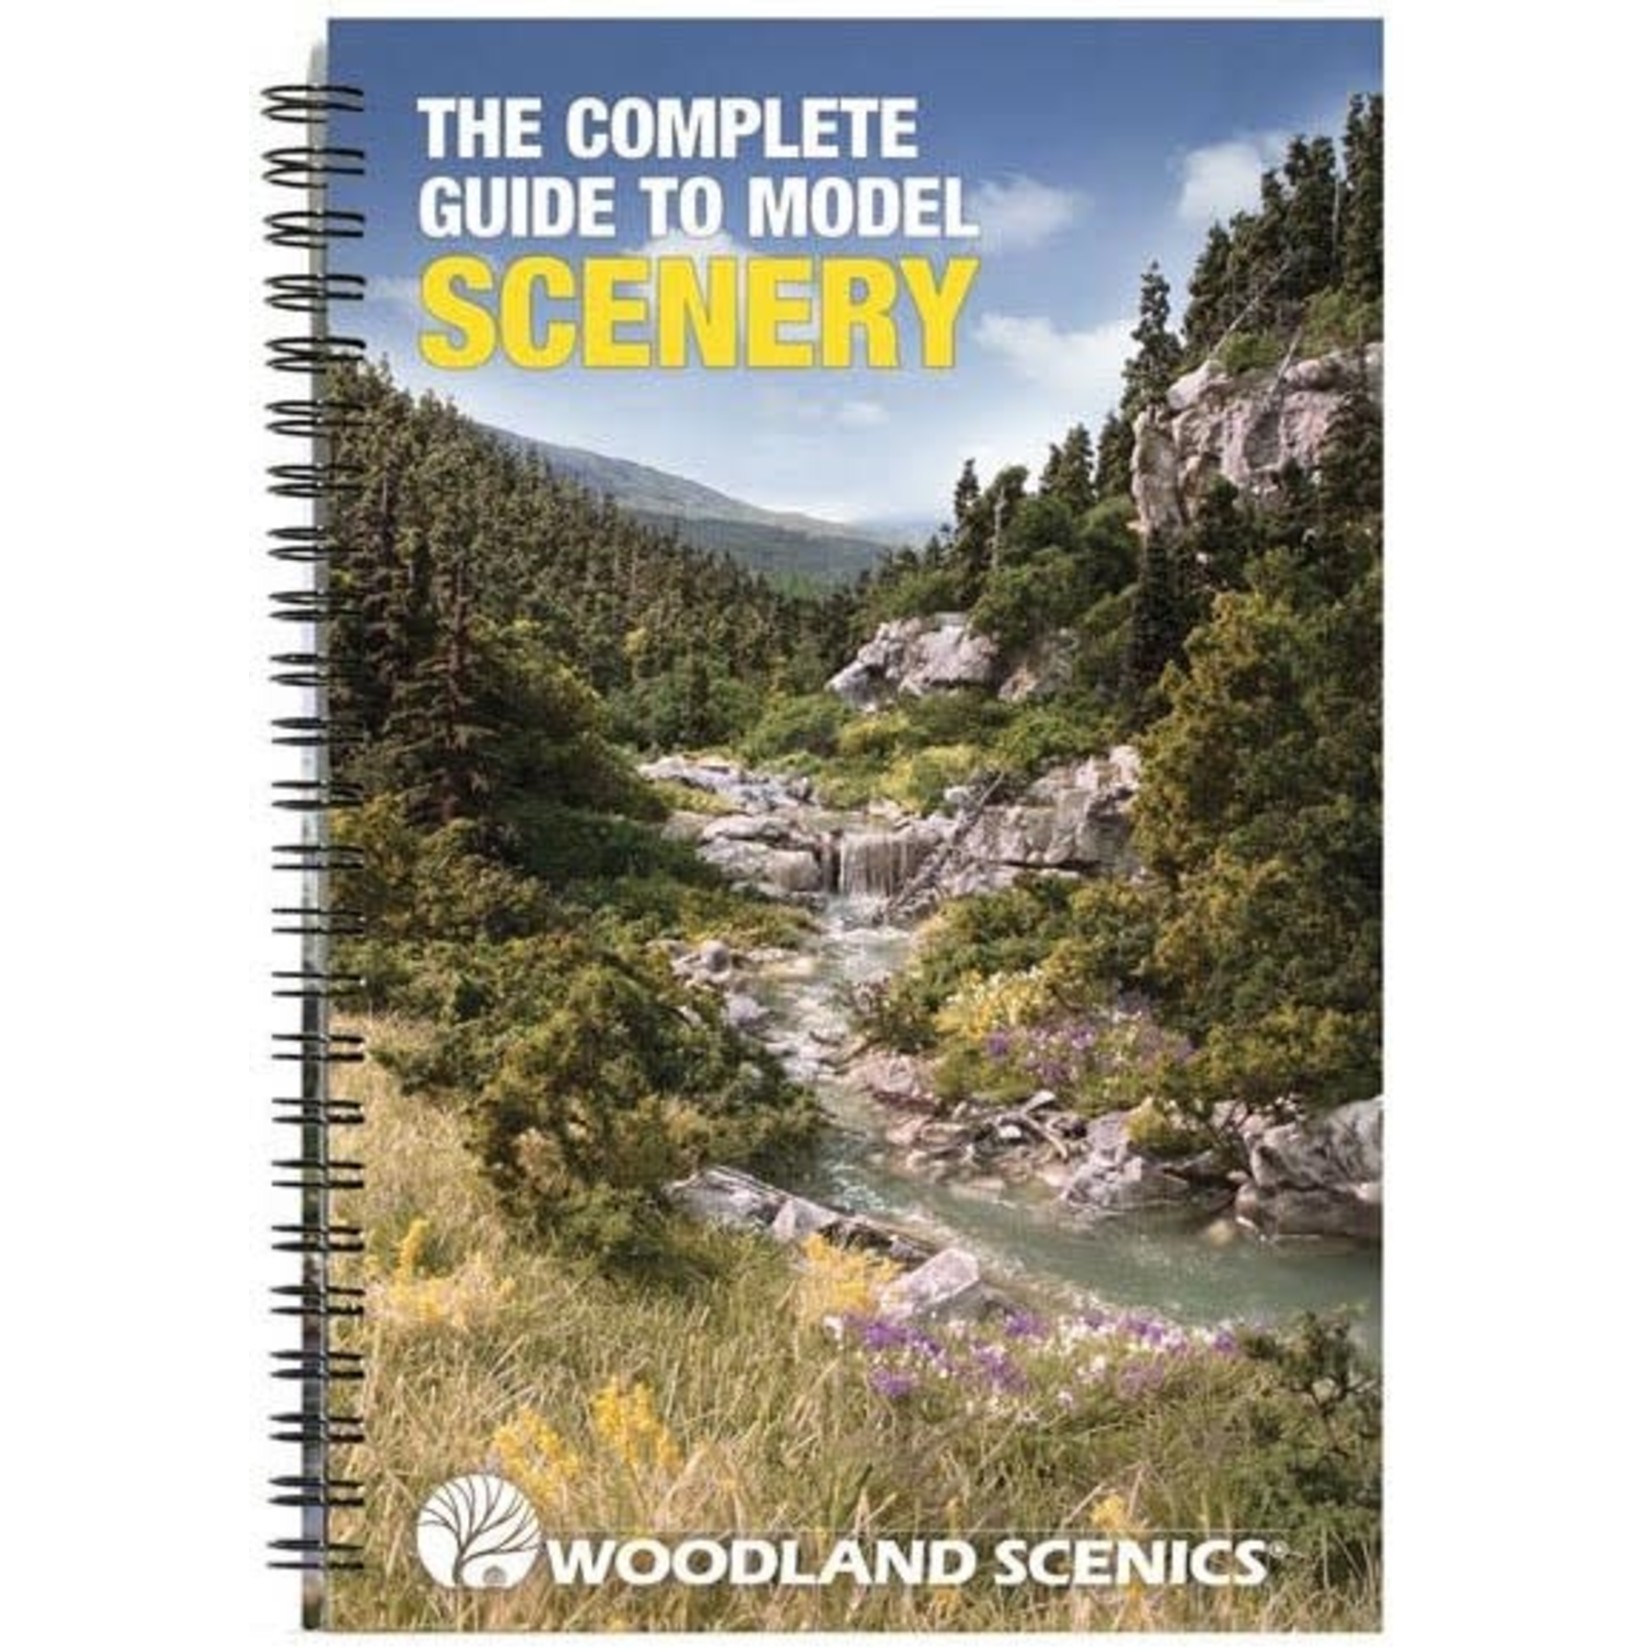 Complete Guide to Model Scenery